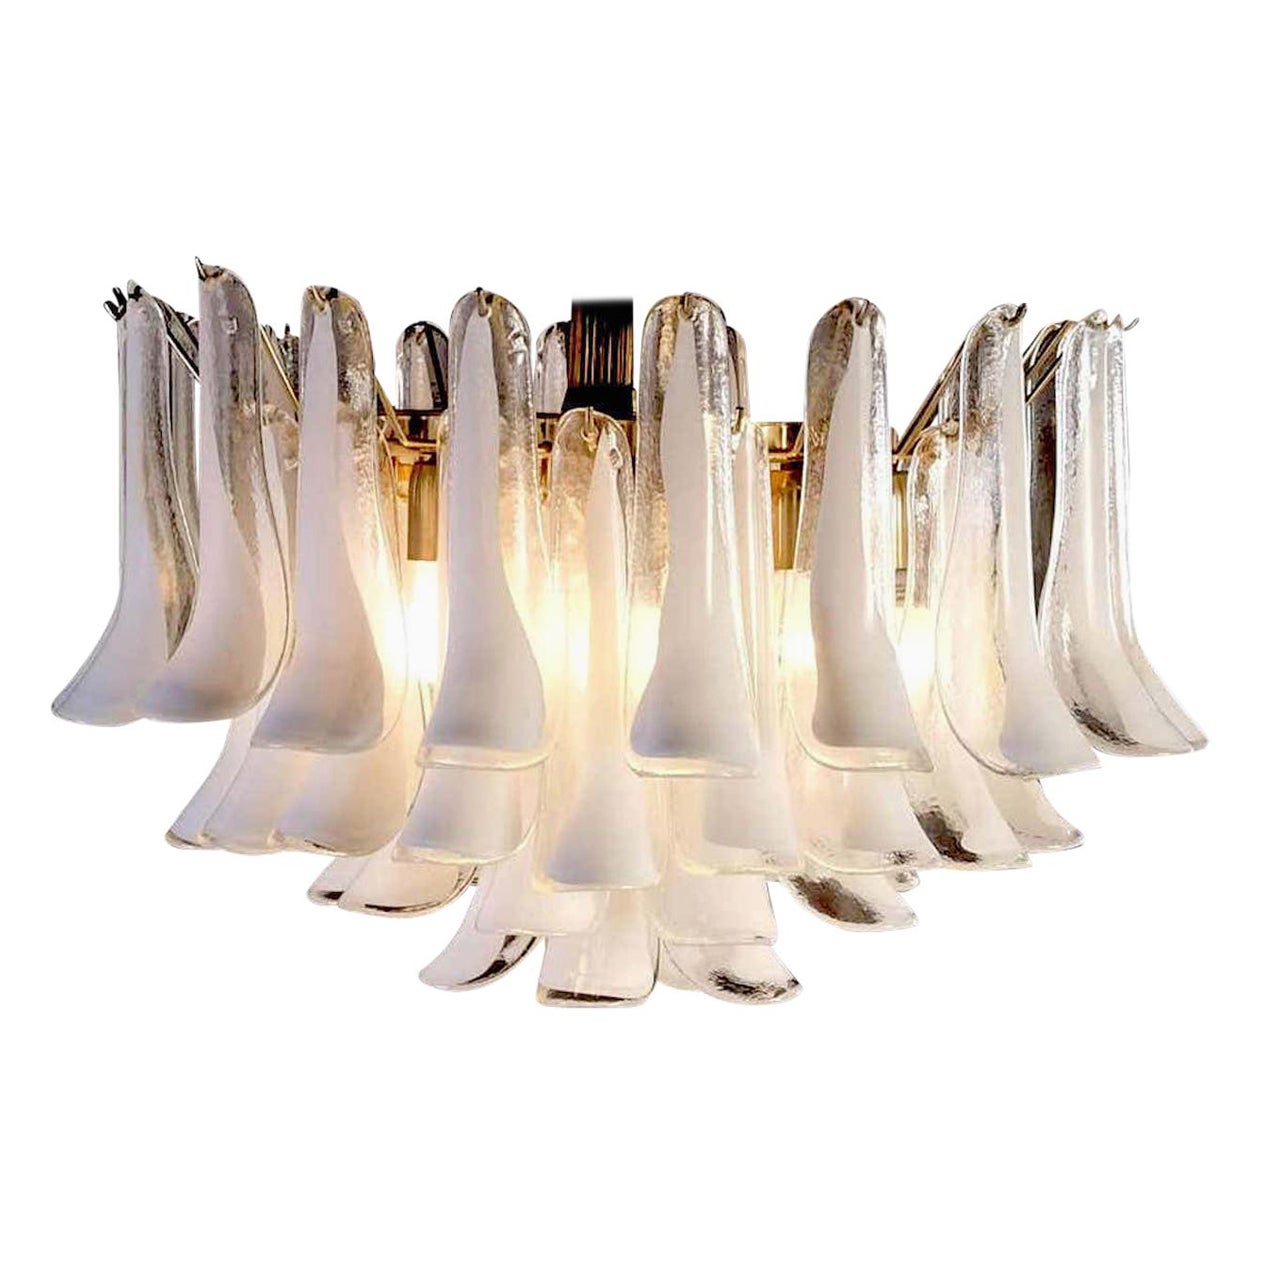 Amazing chandelier with 49 petals white hand blown glass by Murano.

Measures: height with chain cm 80, (31.5 in.) without chain cm54 (21 in.) diameter cm 65 (25.6 in.)
Five E27 light bulbs.
Variations are available on request. (Size, finishes,